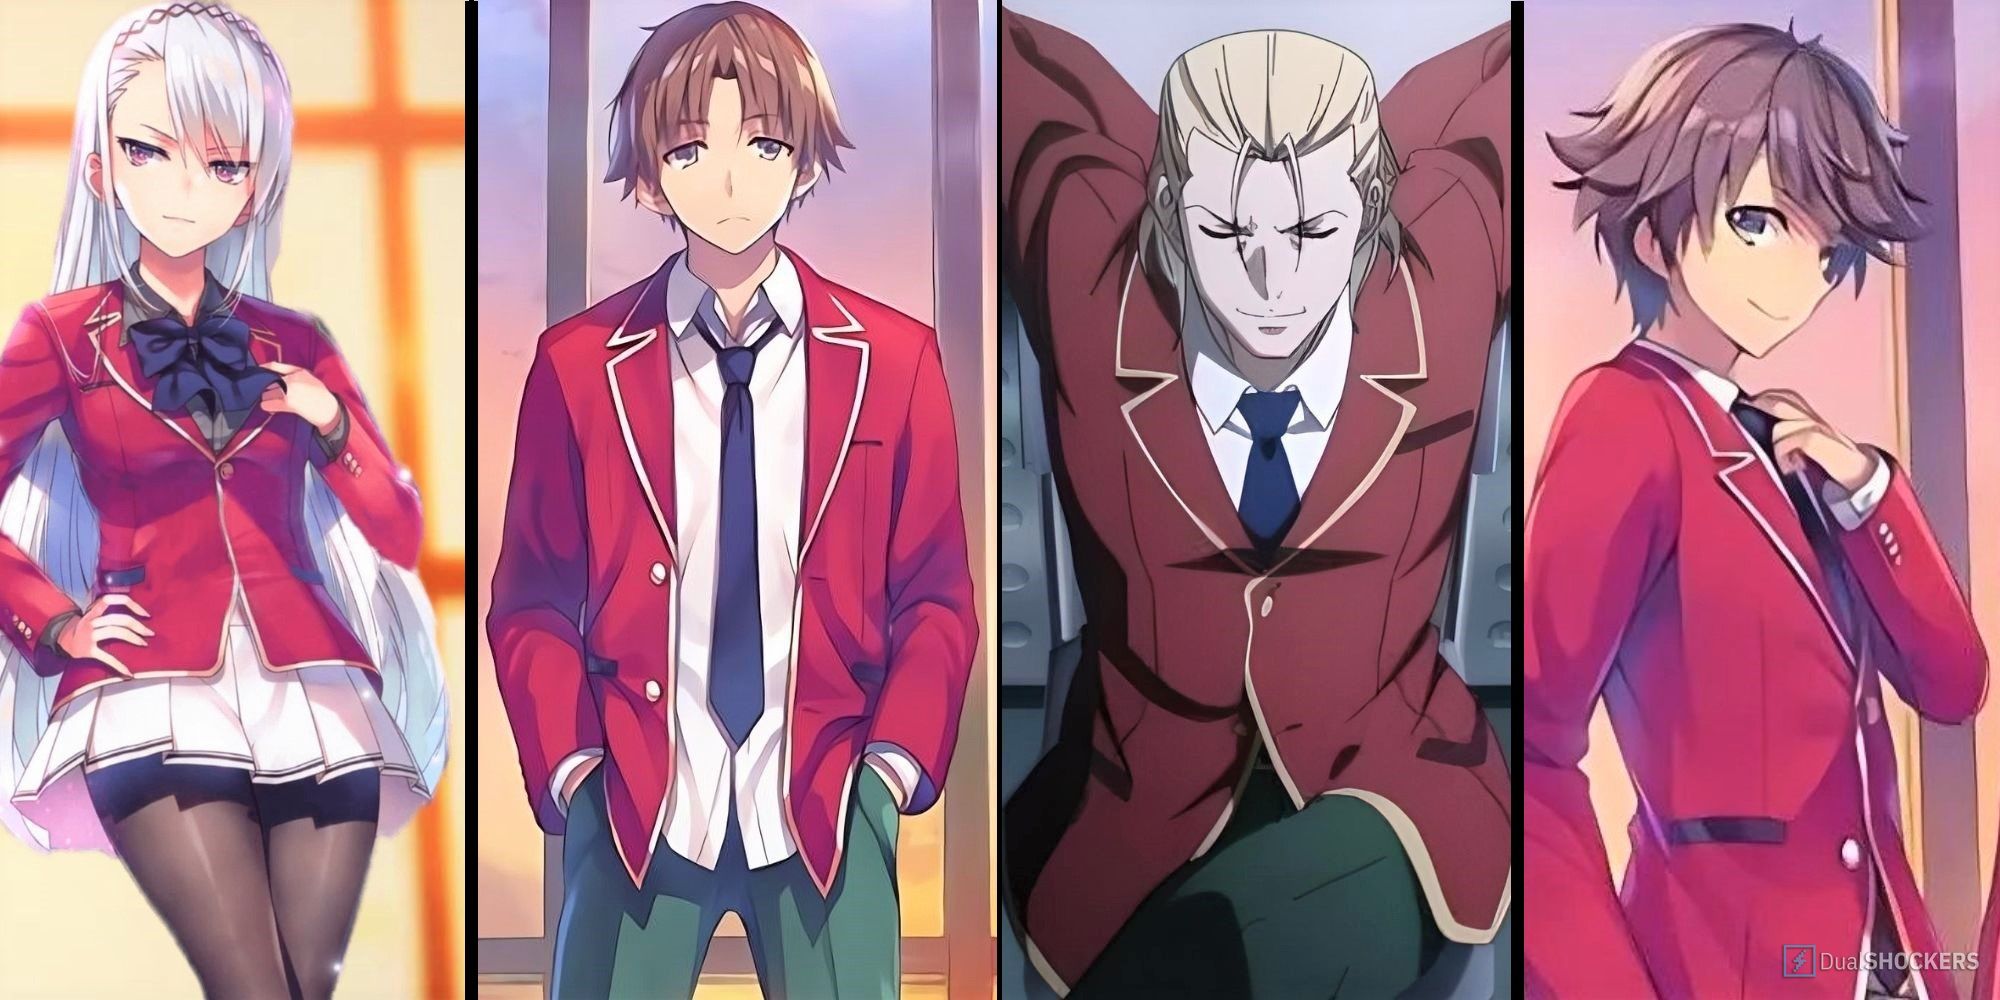 Characters appearing in Classroom of the Elite Anime